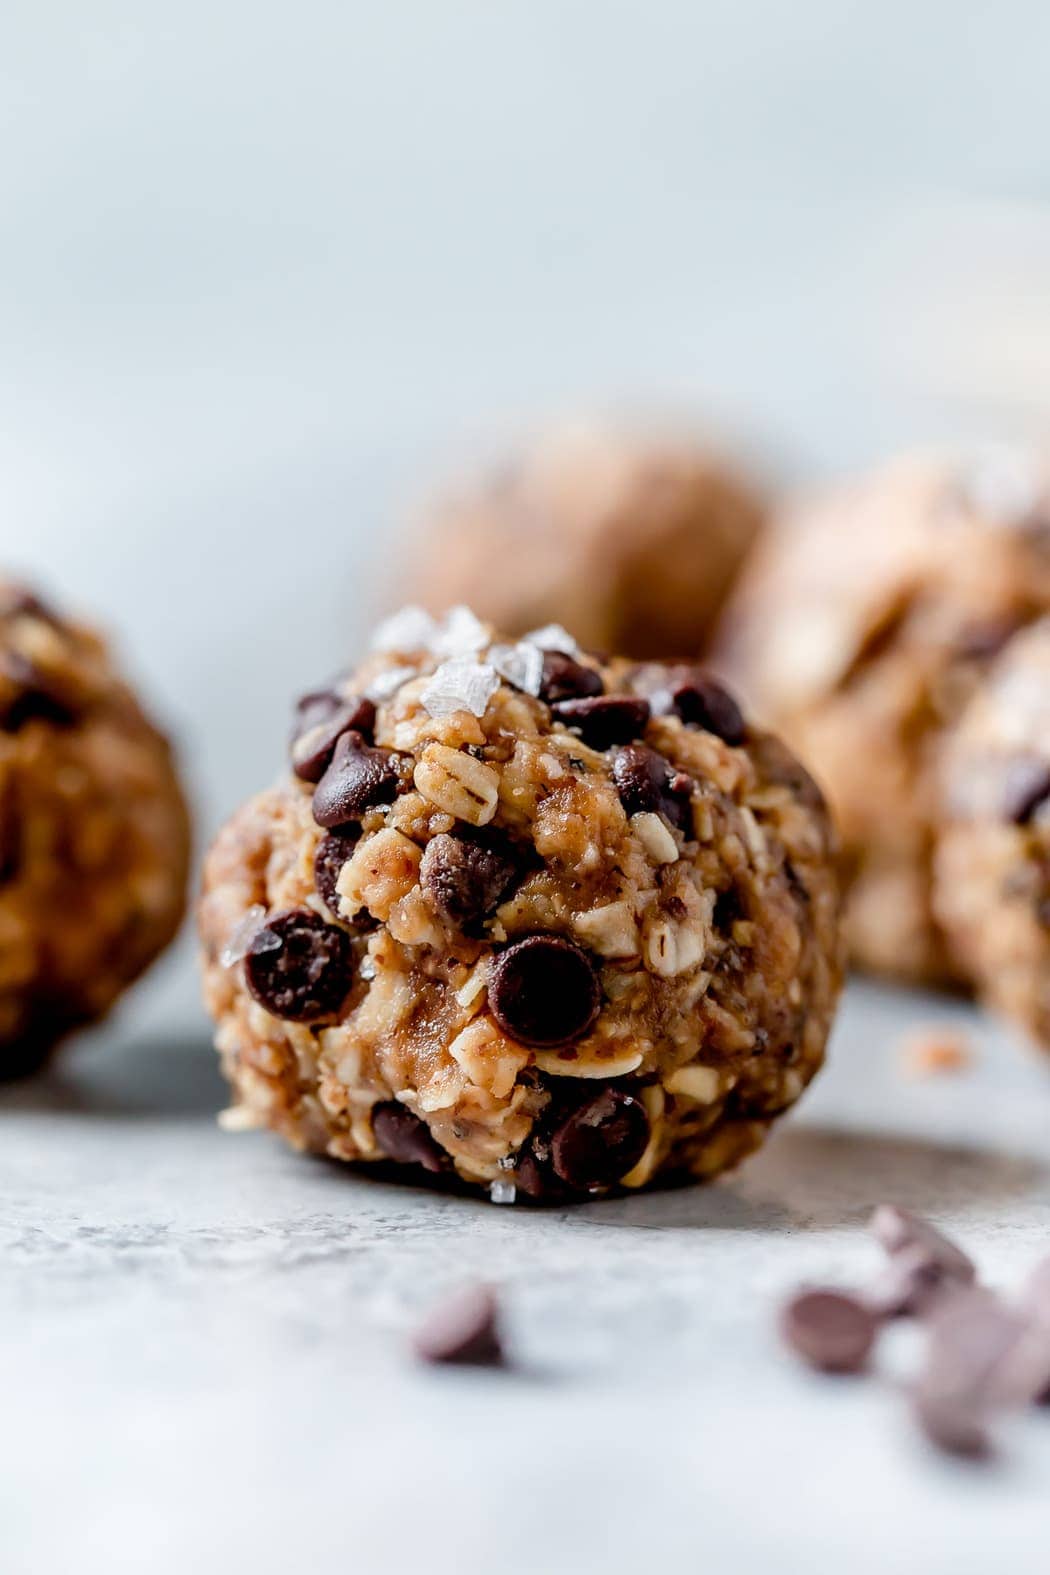 Peanut Butter Oatmeal Balls with chocolate chips studded in them and topped with flakes of sea salt.